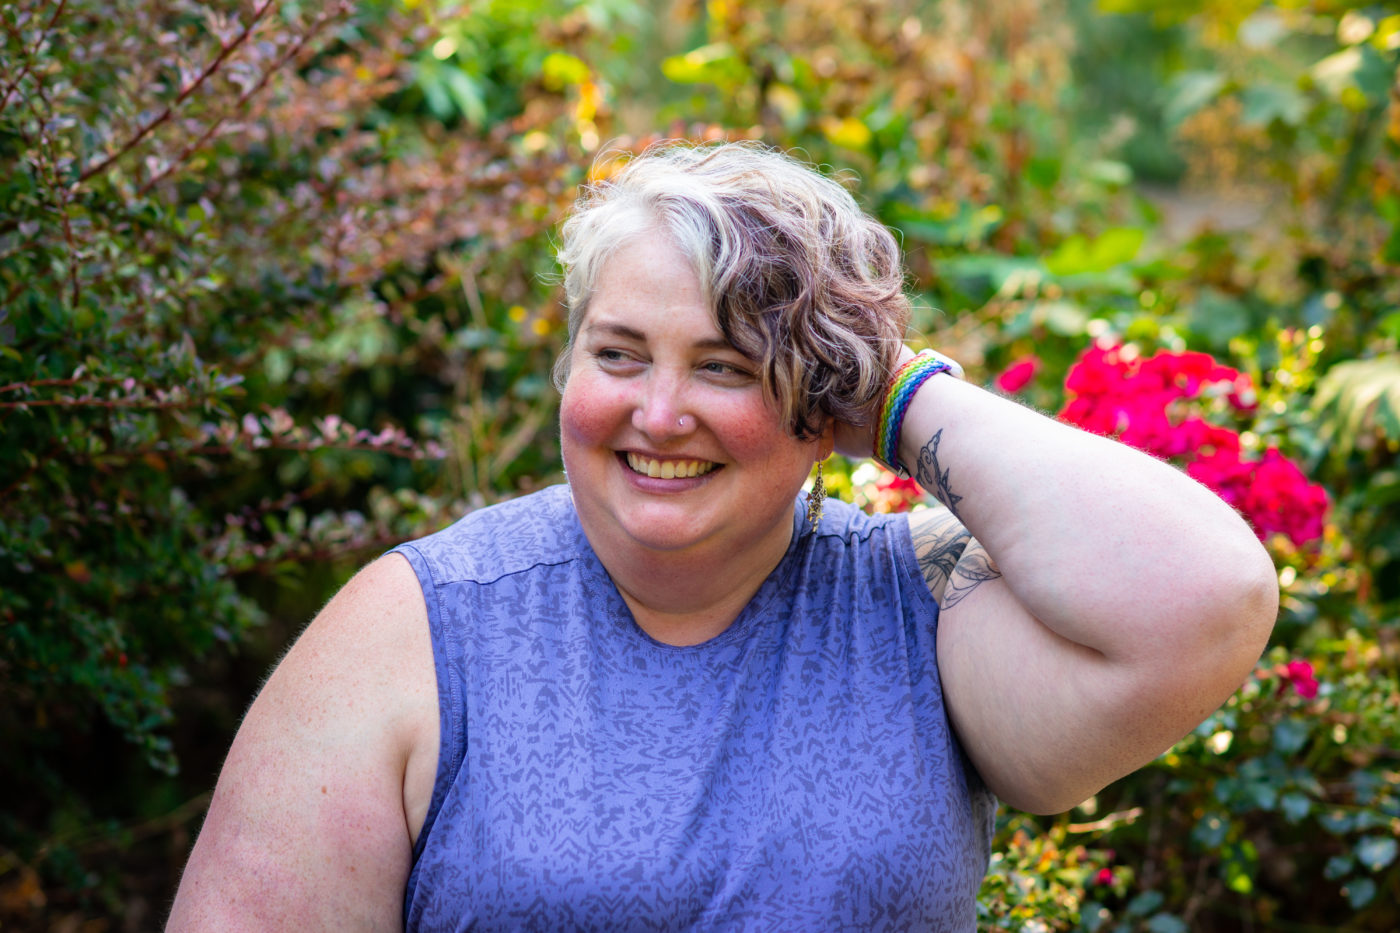 A fat white woman with short brown and gray hair smiles while looking to one side of the camera, with one hand in her hair. She's wearing a sleeveless blue shirt and sitting in front of bushes and bright roses.